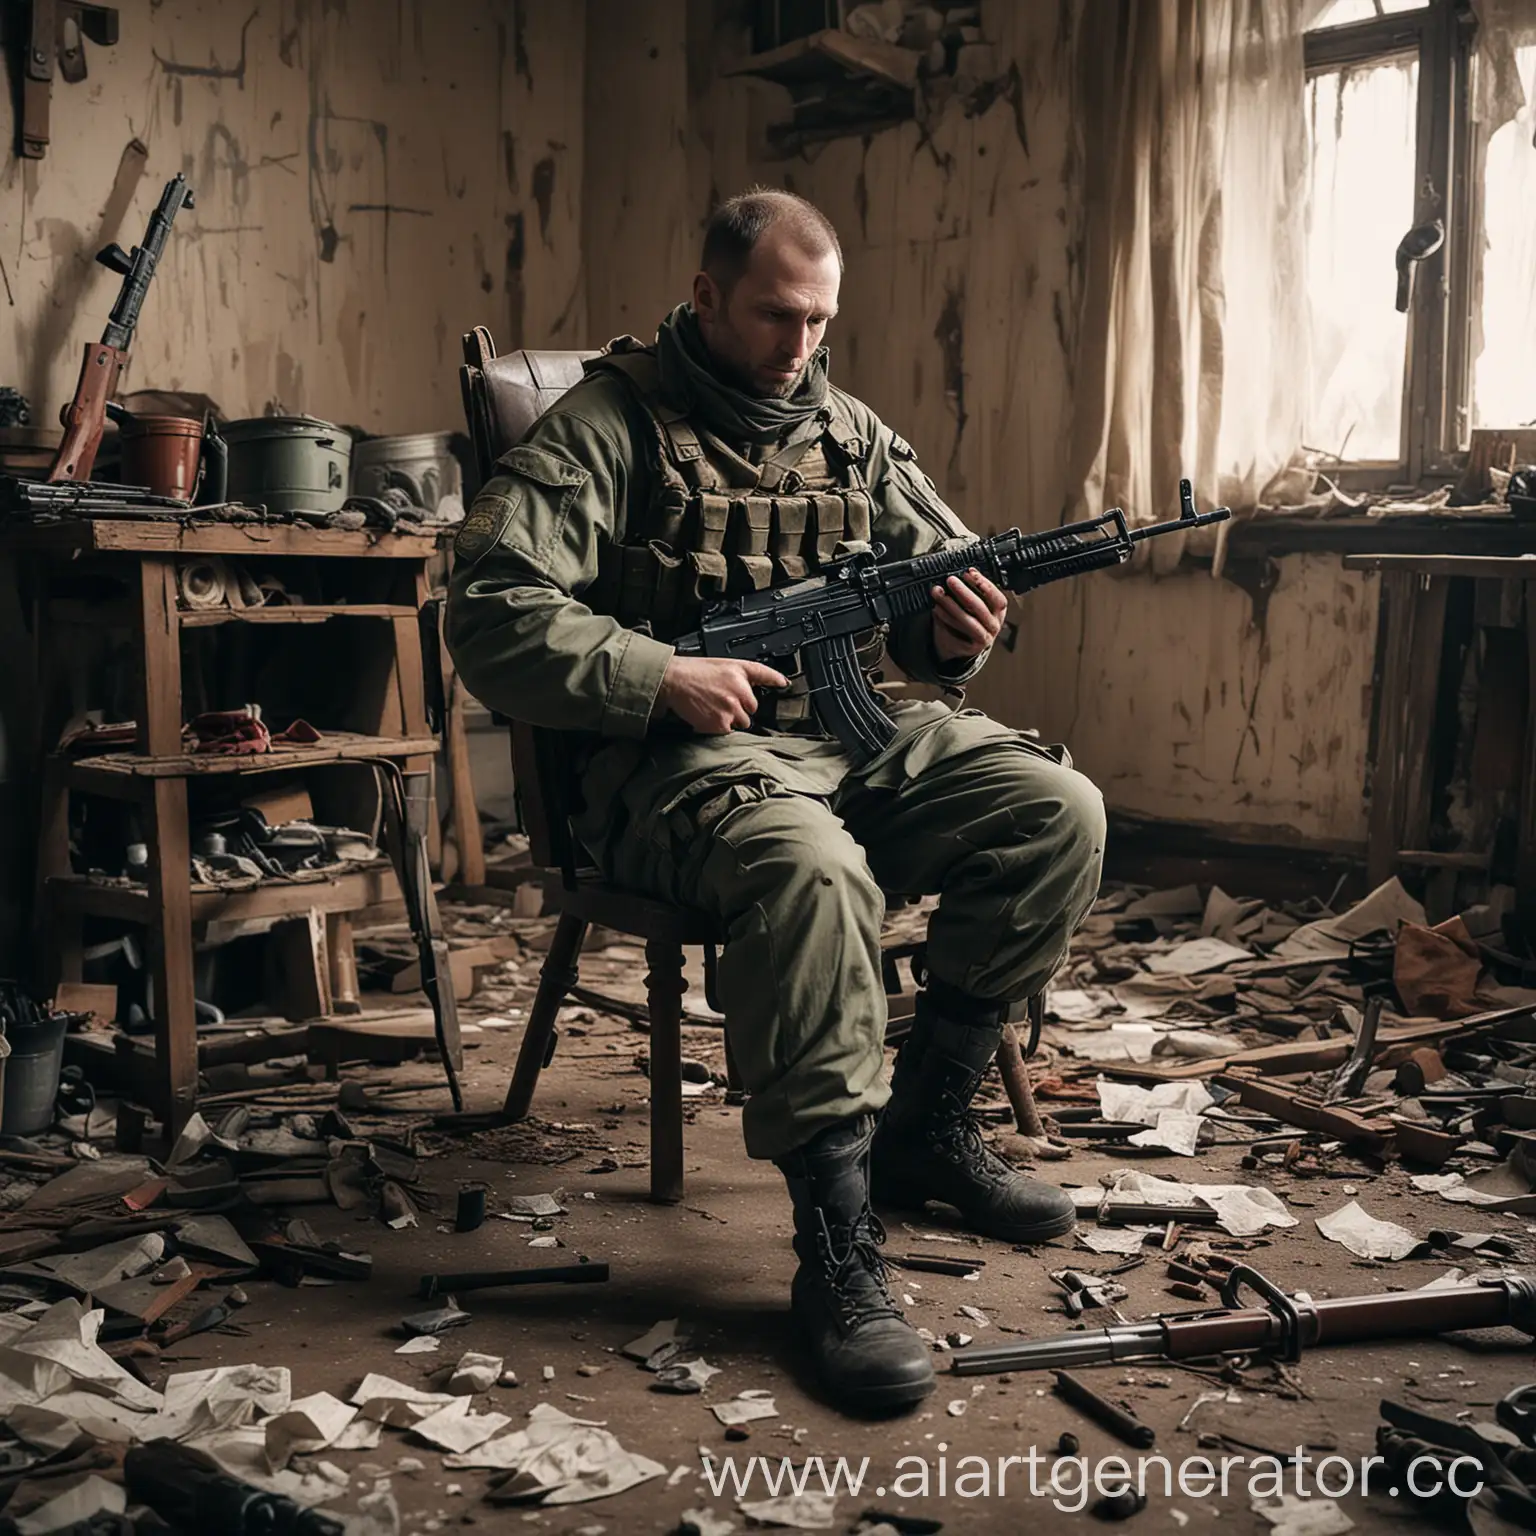 PostApocalyptic-Soldier-Cleaning-AK74-in-Abandoned-House